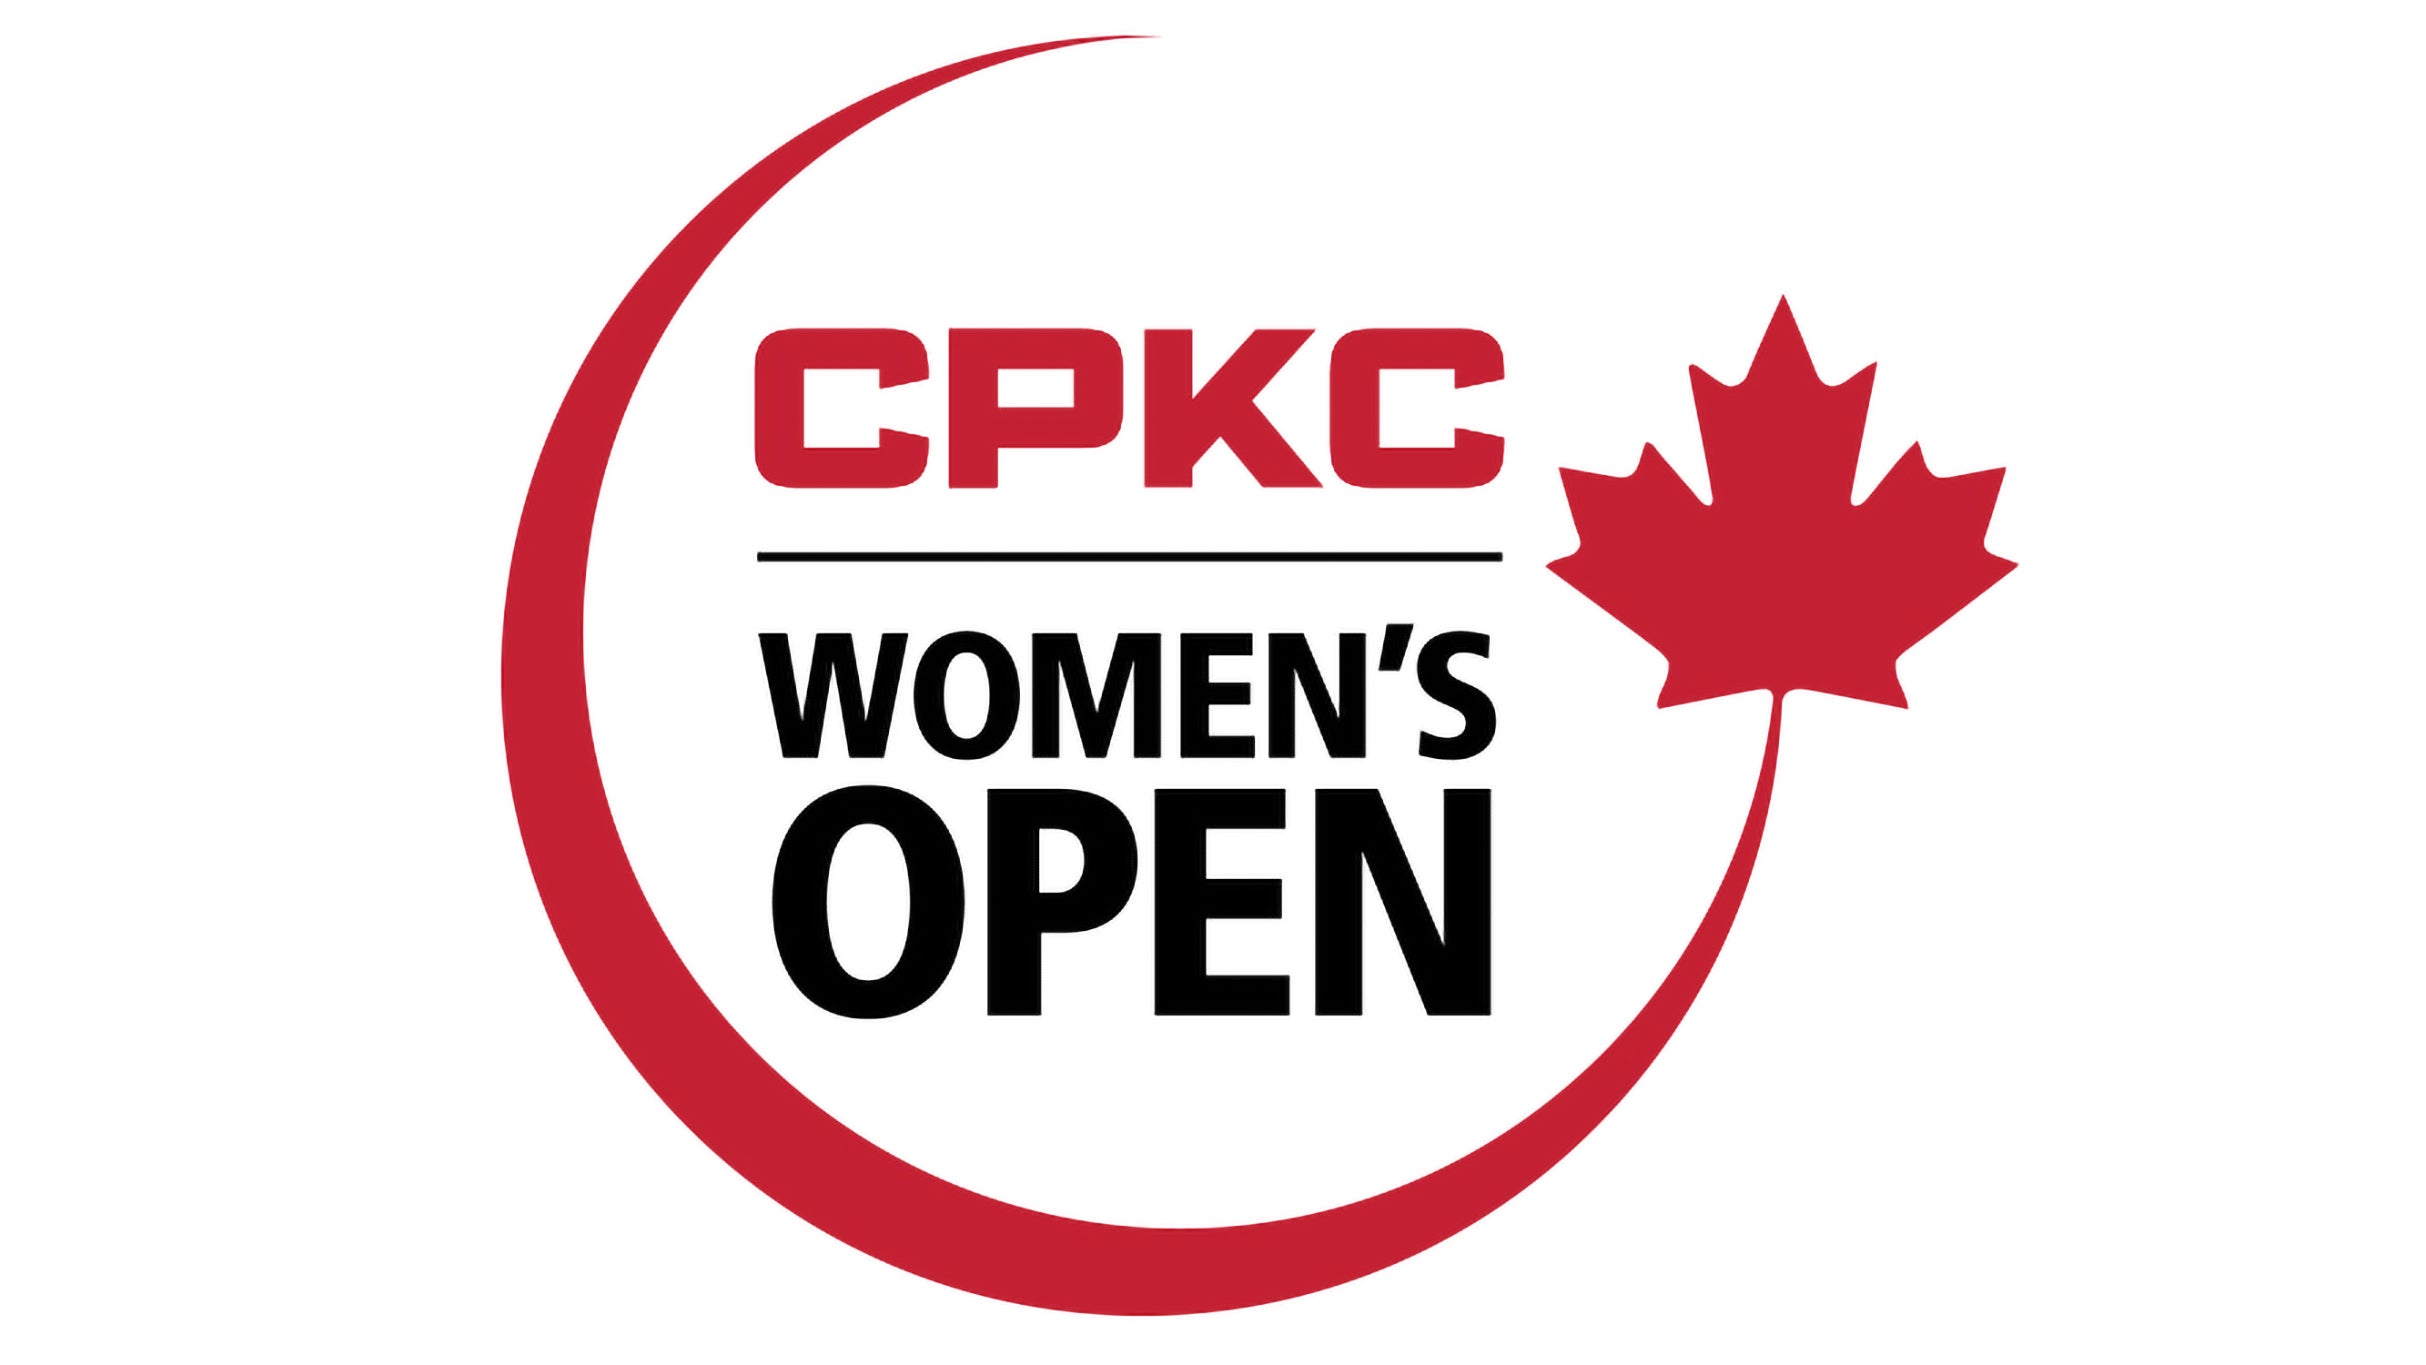 CPKC Women's Open - Friday Tickets in Vancouver promo photo for Golf Canada Partner presale offer code